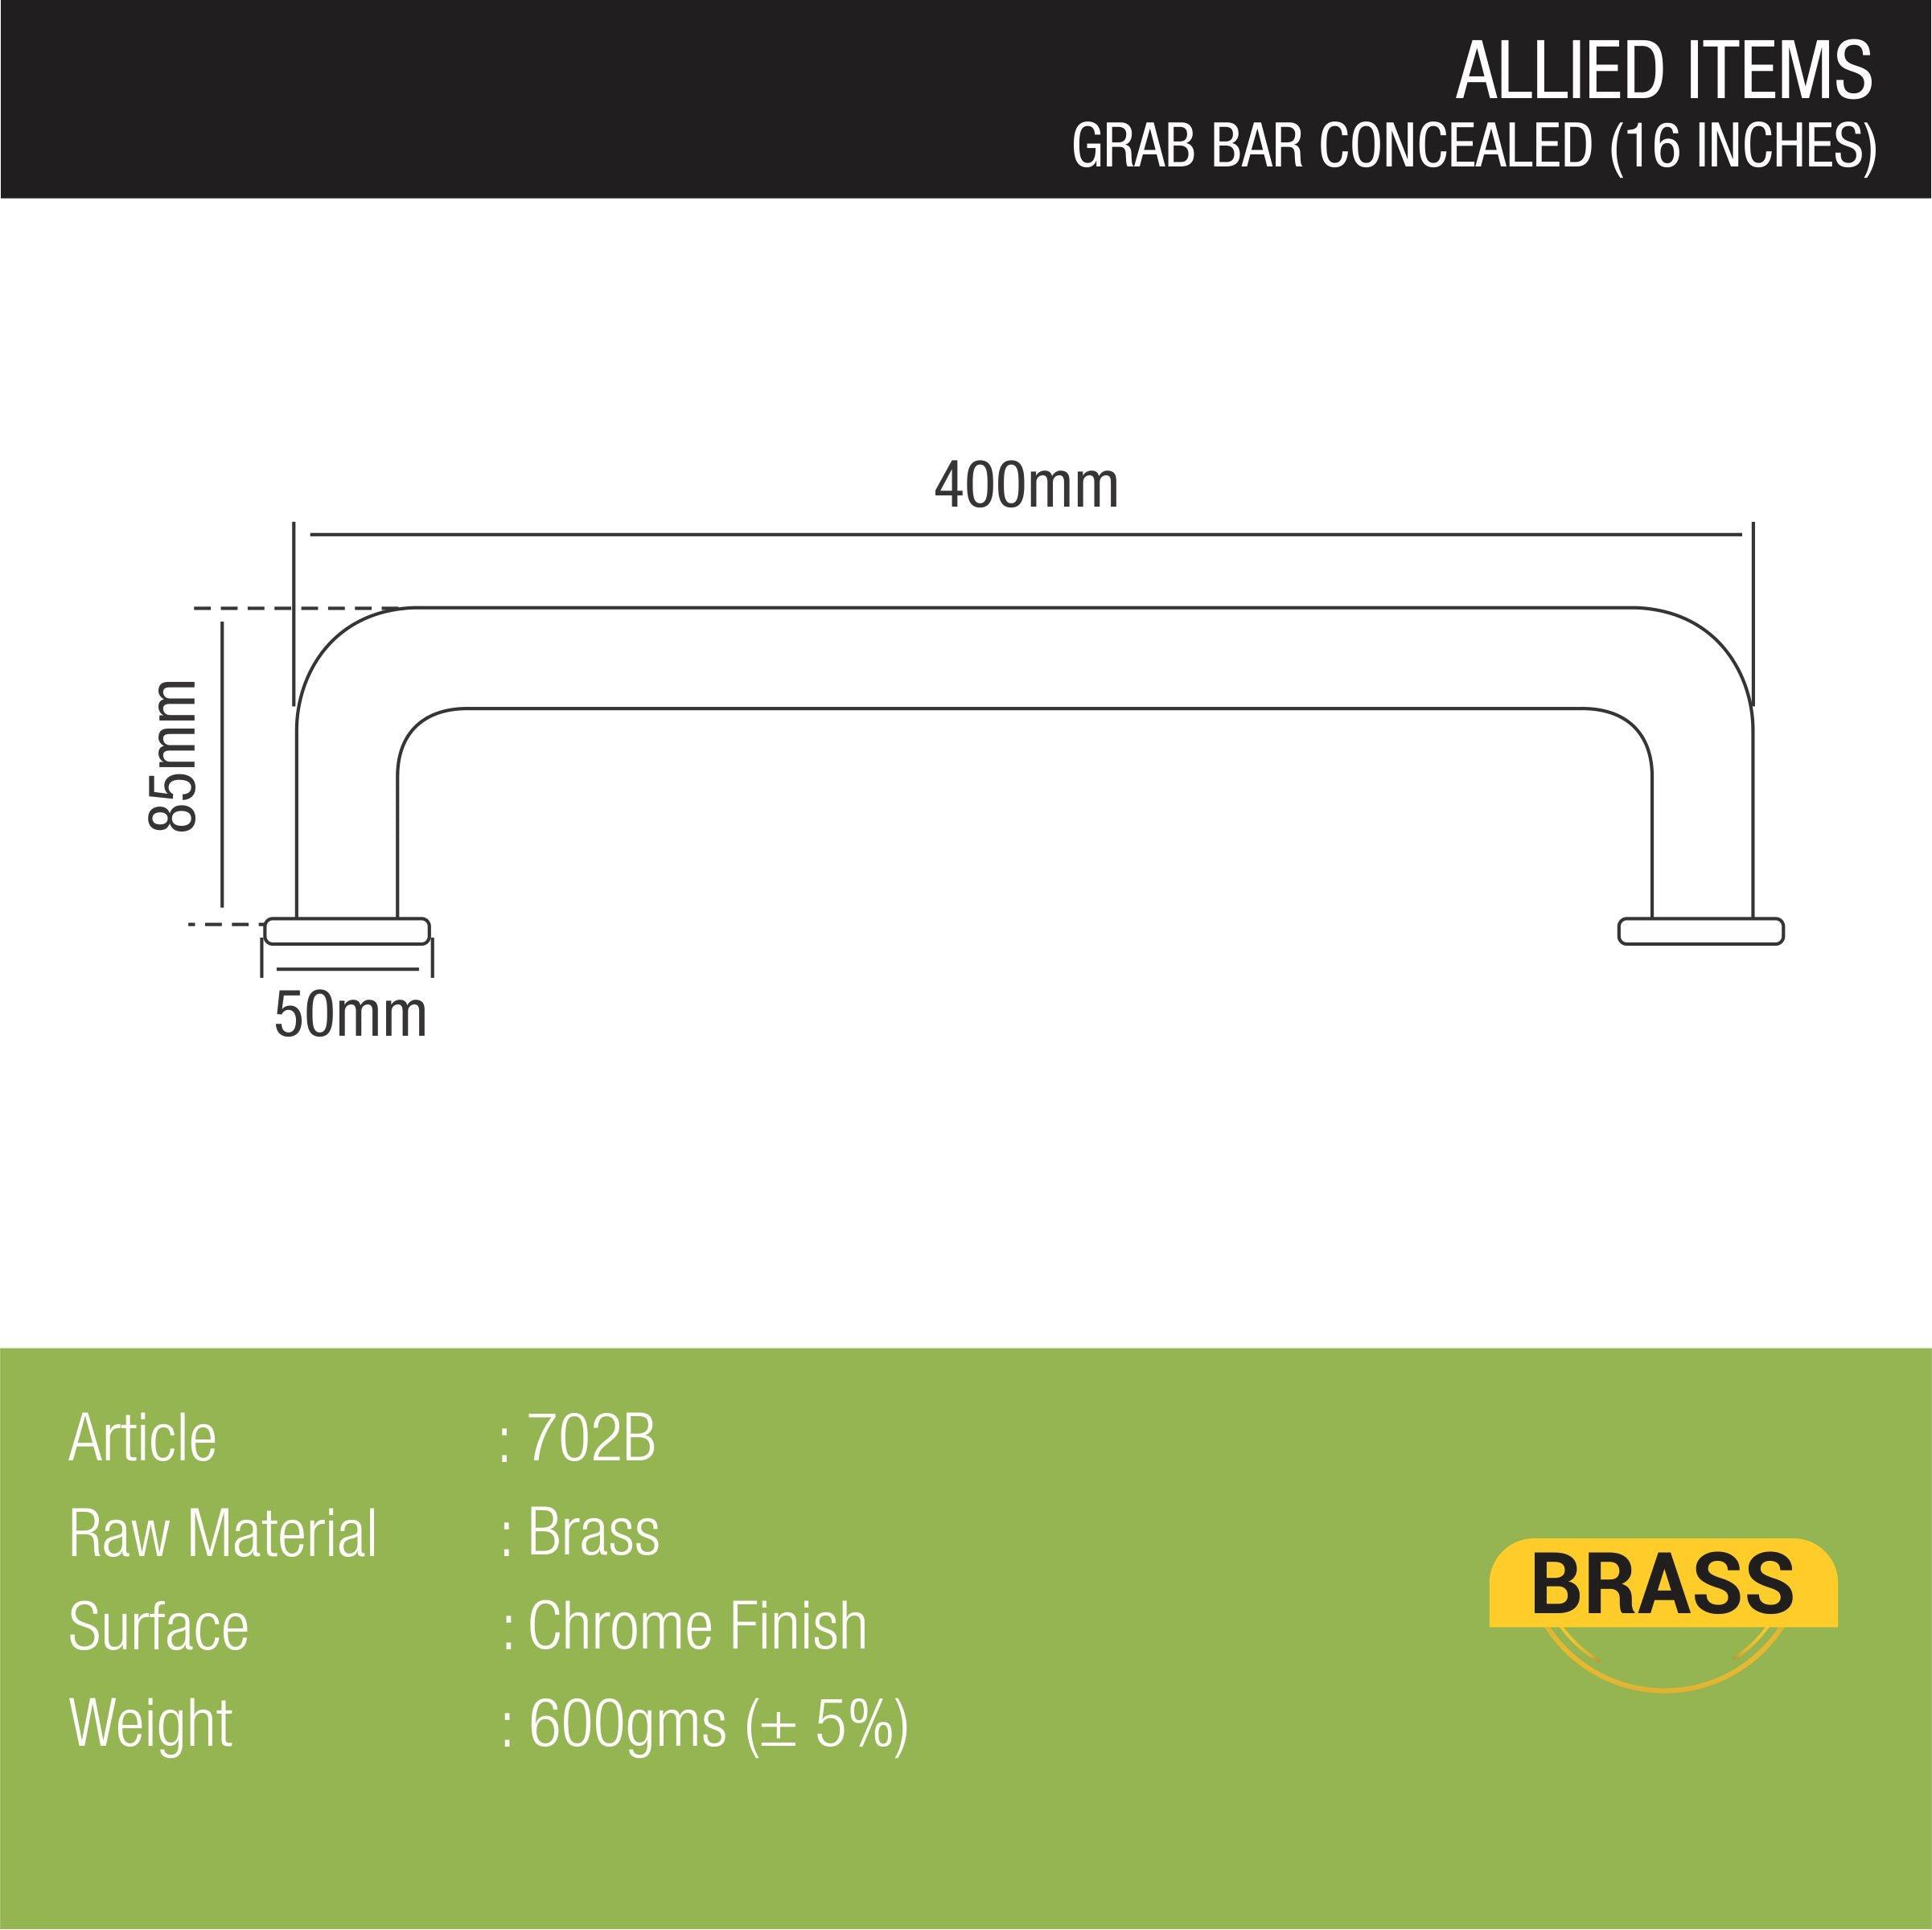 Brass Concealed Grab Bar (16 Inches) sizes and dimensions